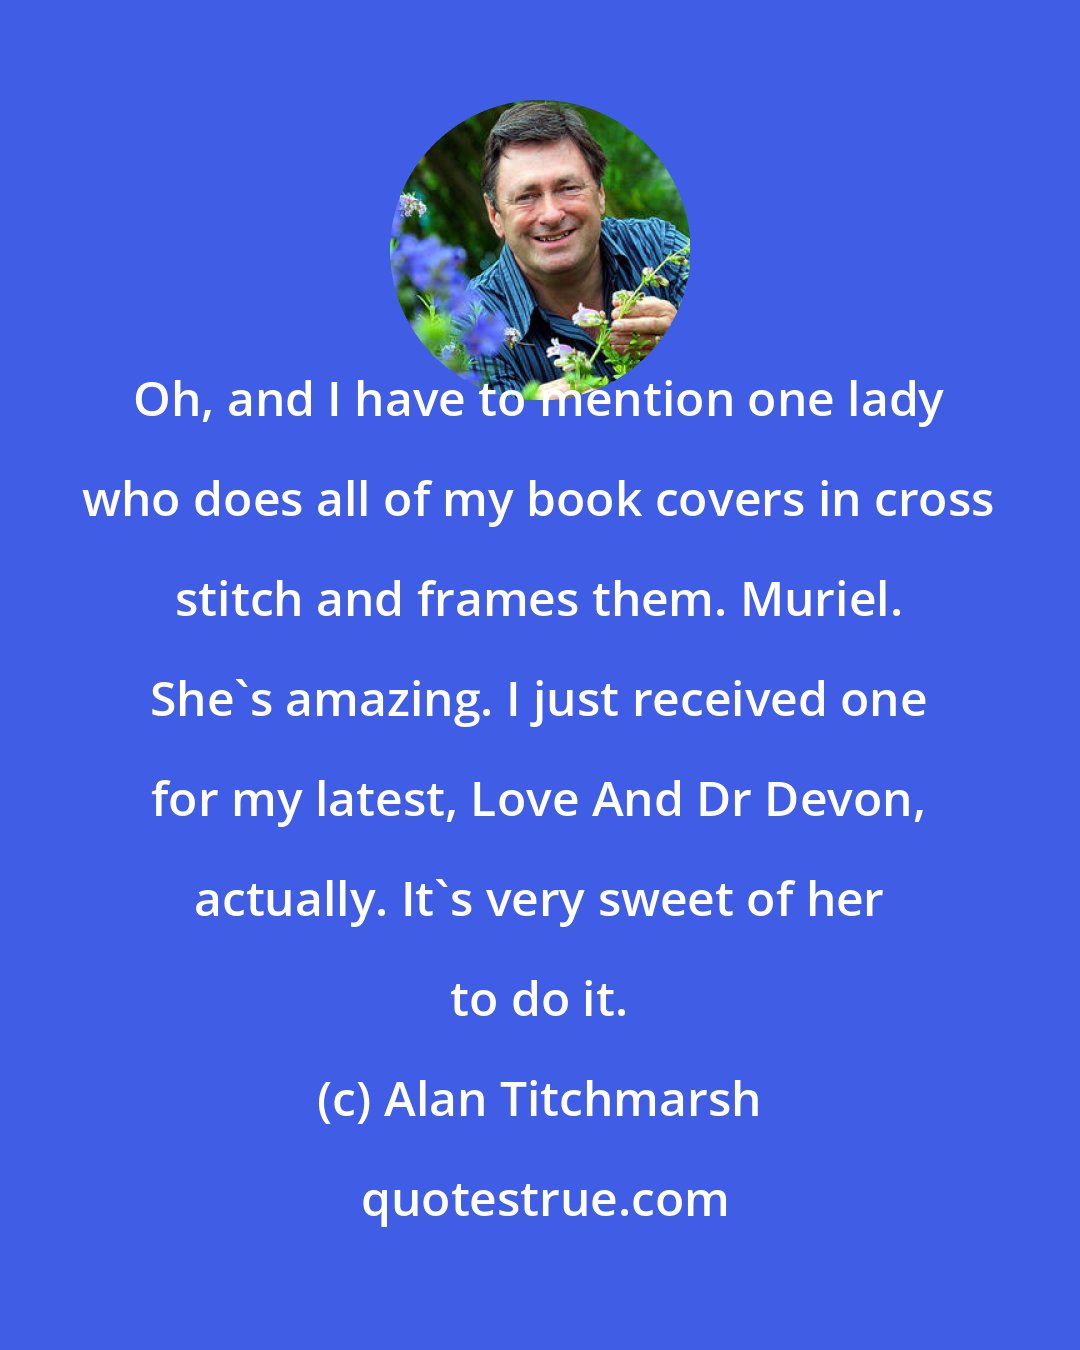 Alan Titchmarsh: Oh, and I have to mention one lady who does all of my book covers in cross stitch and frames them. Muriel. She's amazing. I just received one for my latest, Love And Dr Devon, actually. It's very sweet of her to do it.